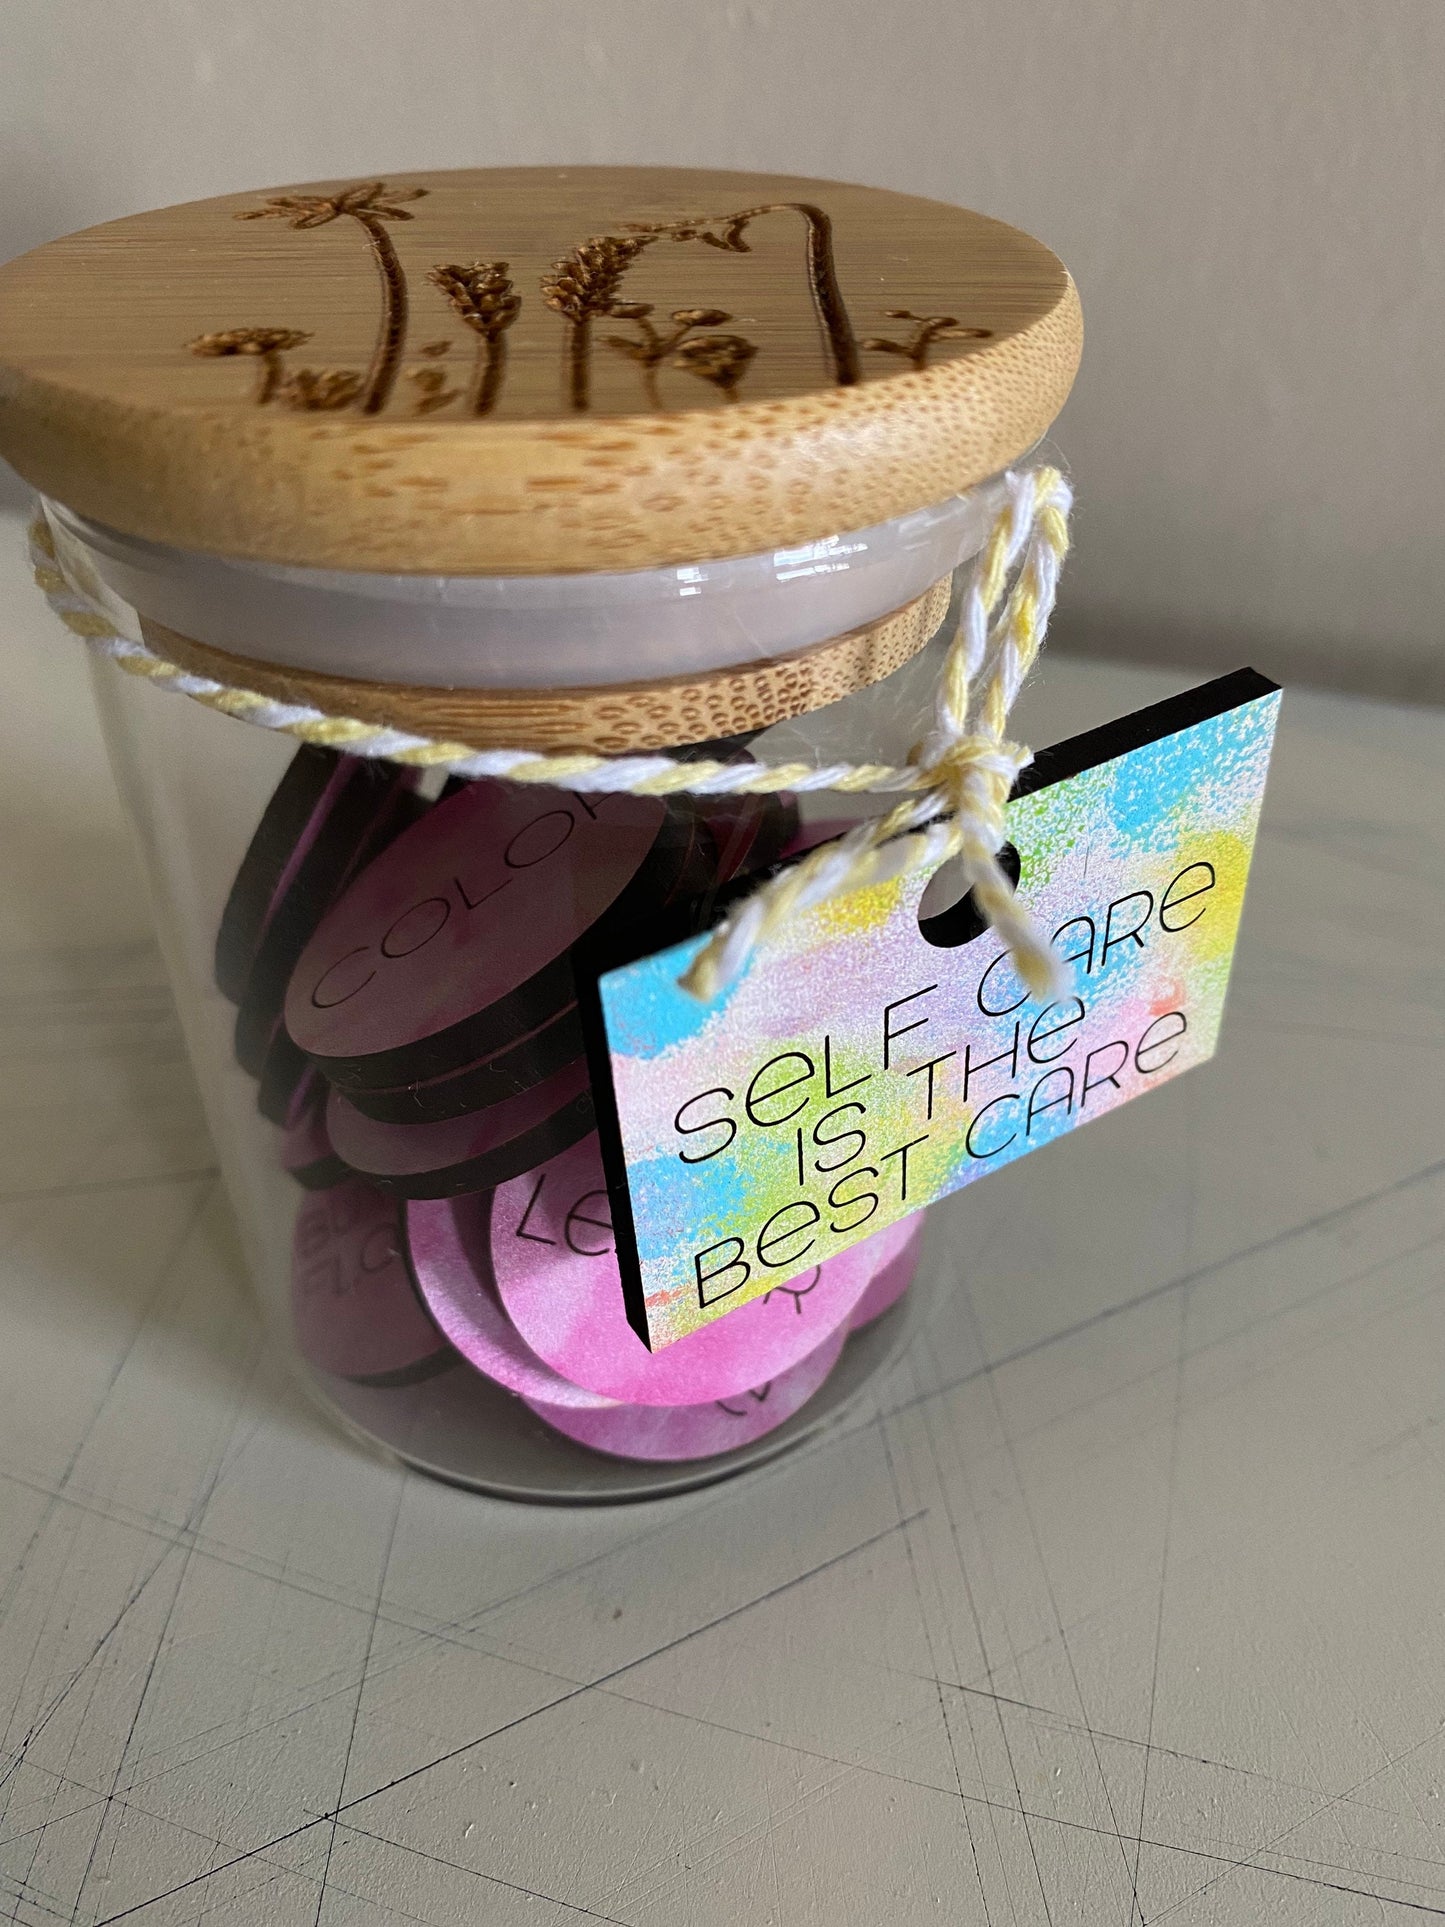 Self care is the best care - set of 25 tokens with engraved token jar